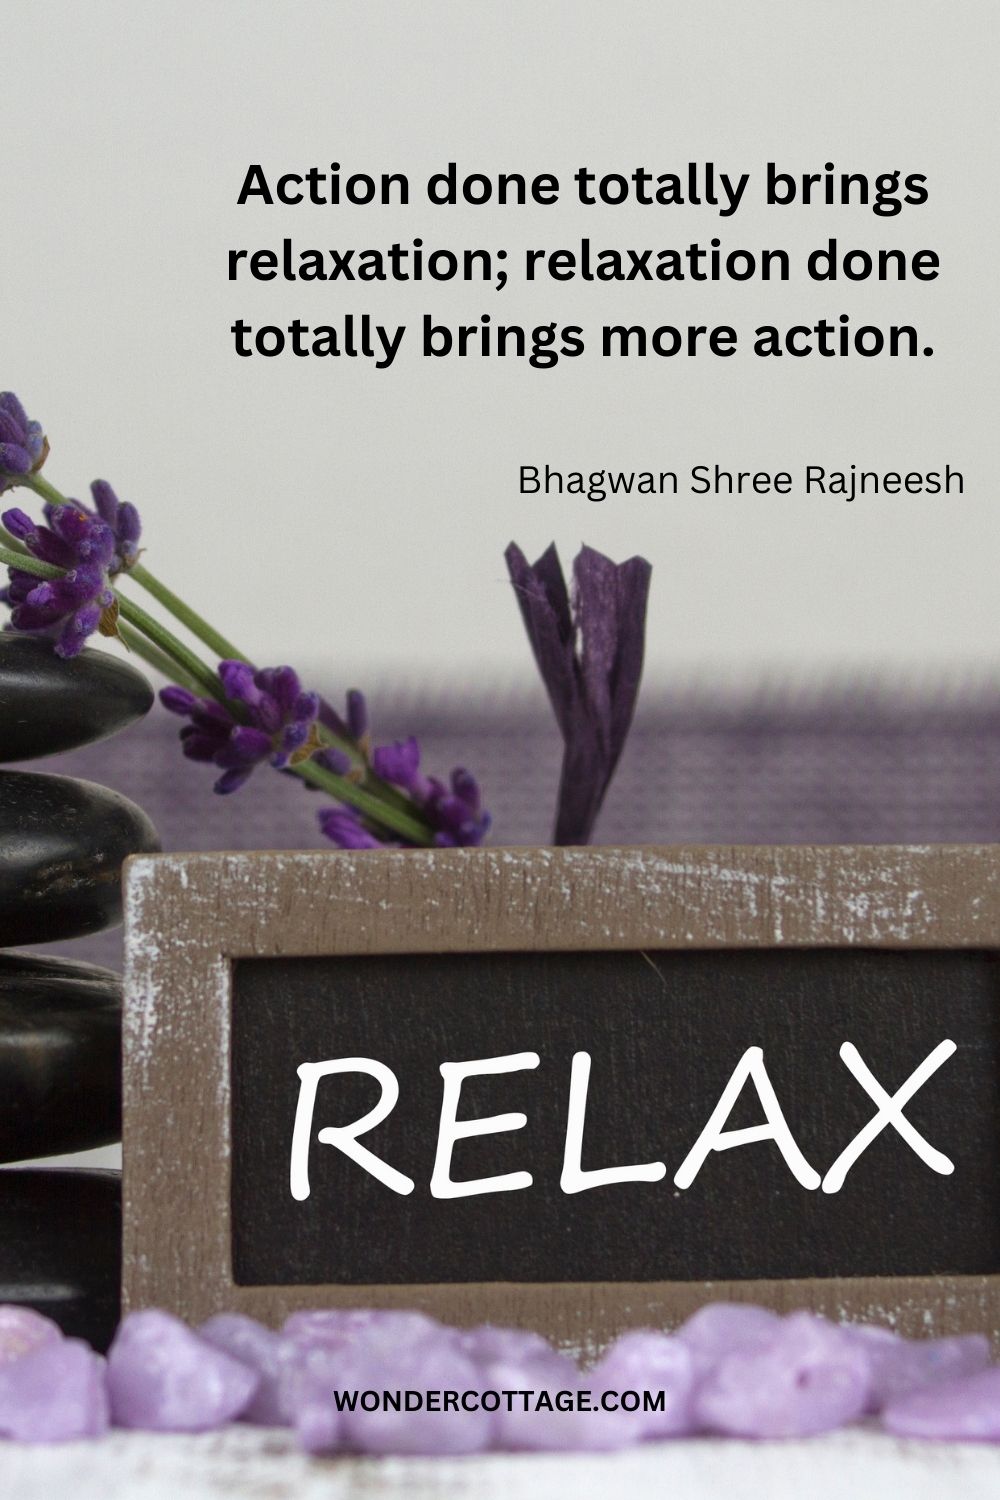 Action done totally brings relaxation; relaxation done totally brings more action. Bhagwan Shree Rajneesh